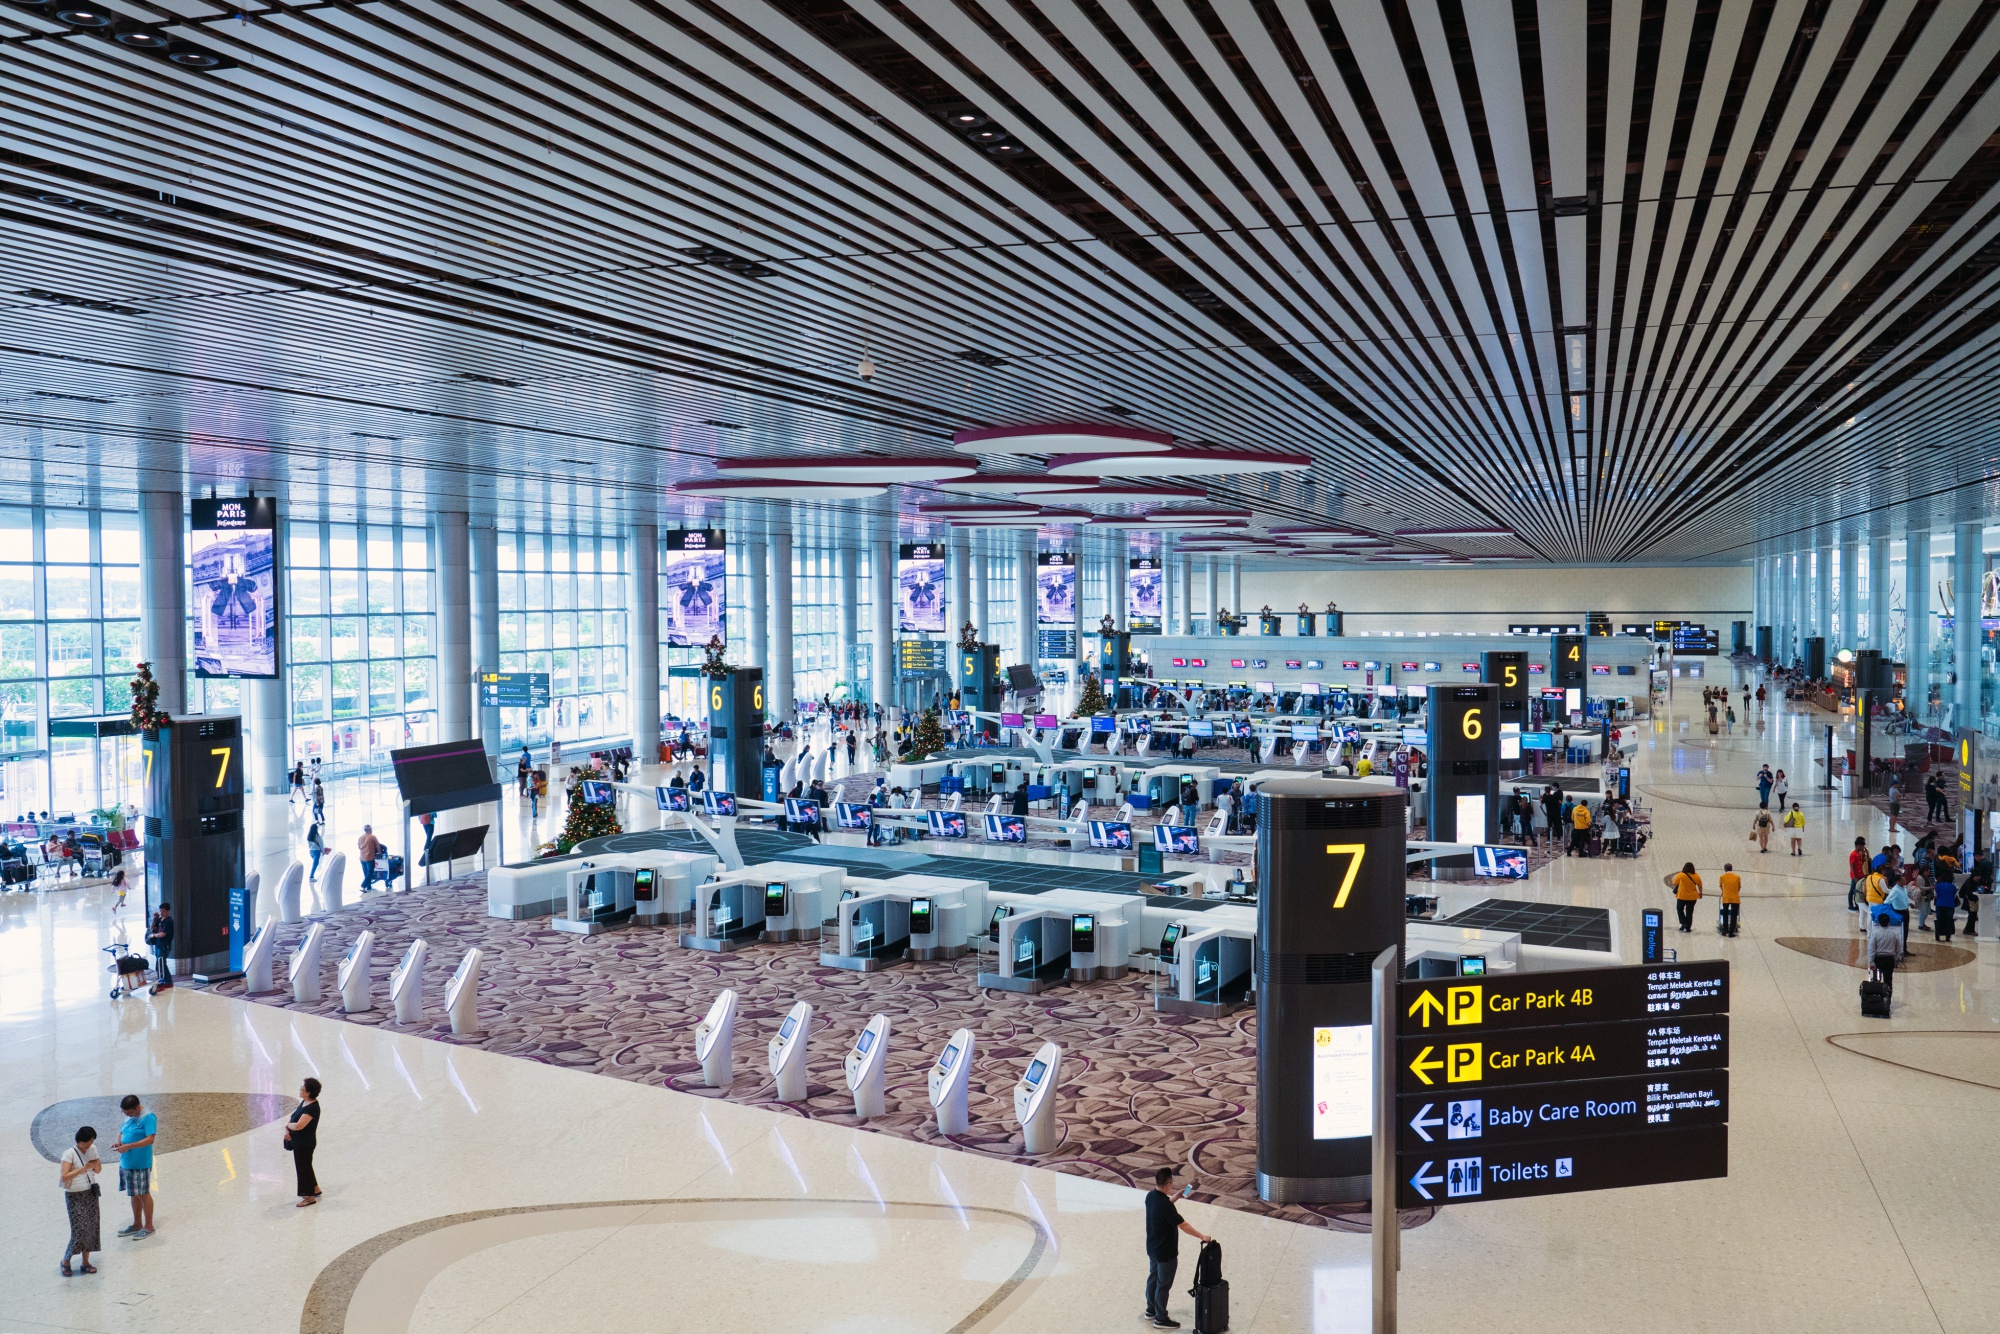 The departure hall at Terminal 4 (T4) of Changi Airport in Singapore.